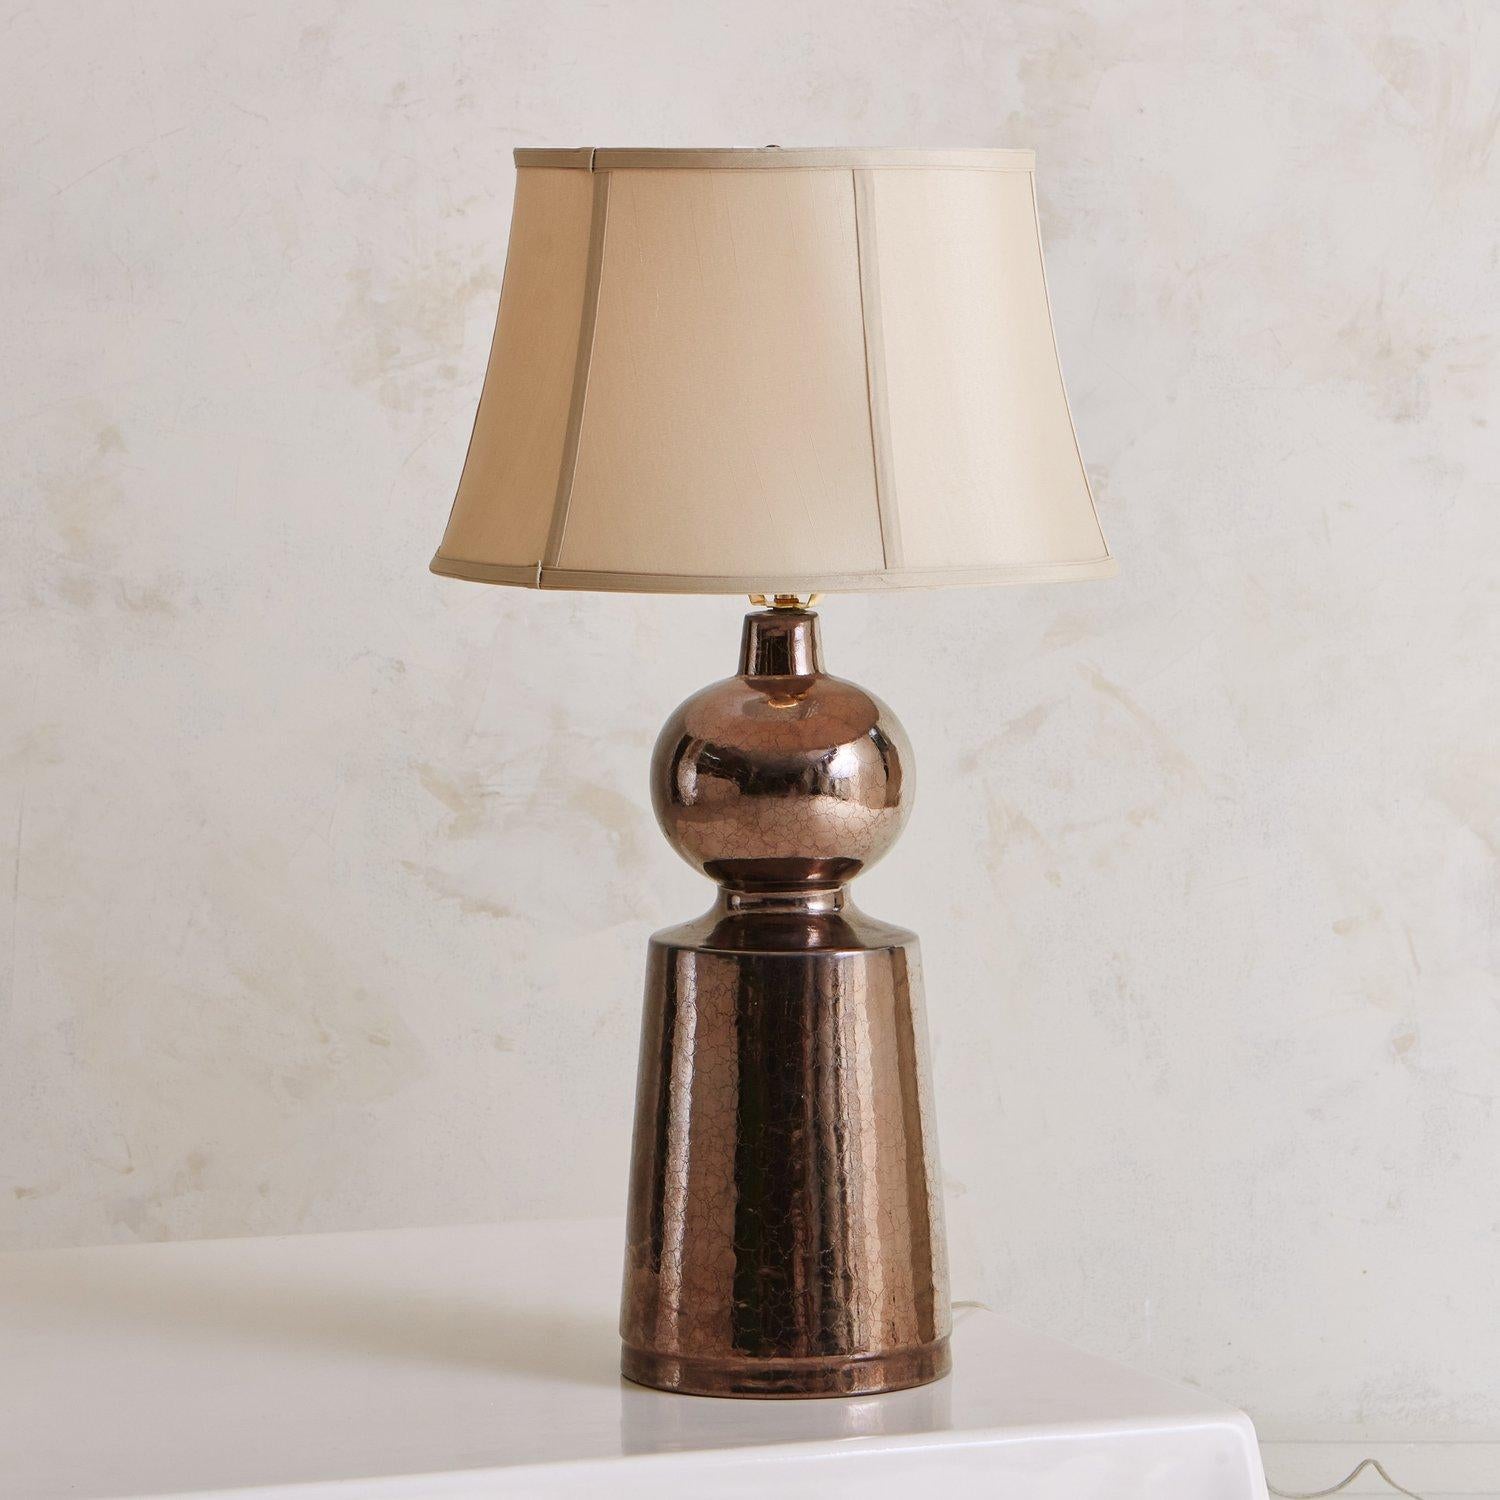 A sculptural bronze ceramic lamp with a beautiful mirror glaze finish. A beautiful accent piece for a living room or bedroom. Sourced in France, 20th Century.